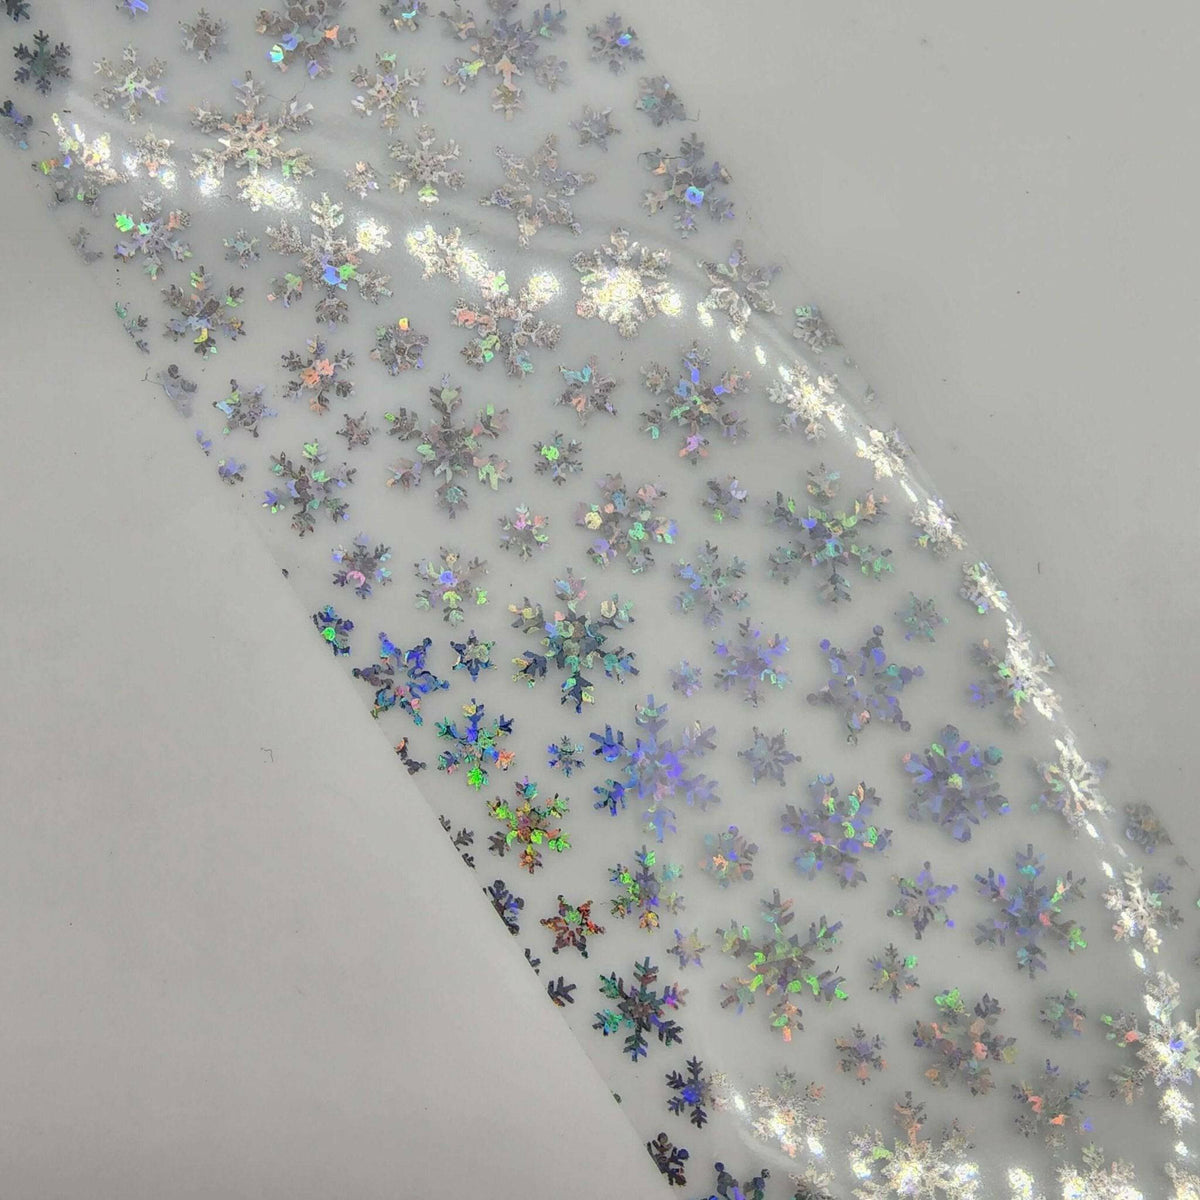 Holo Snowflake Transfer Foil by thePINKchair - thePINKchair.ca - Nail Art - thePINKchair nail studio